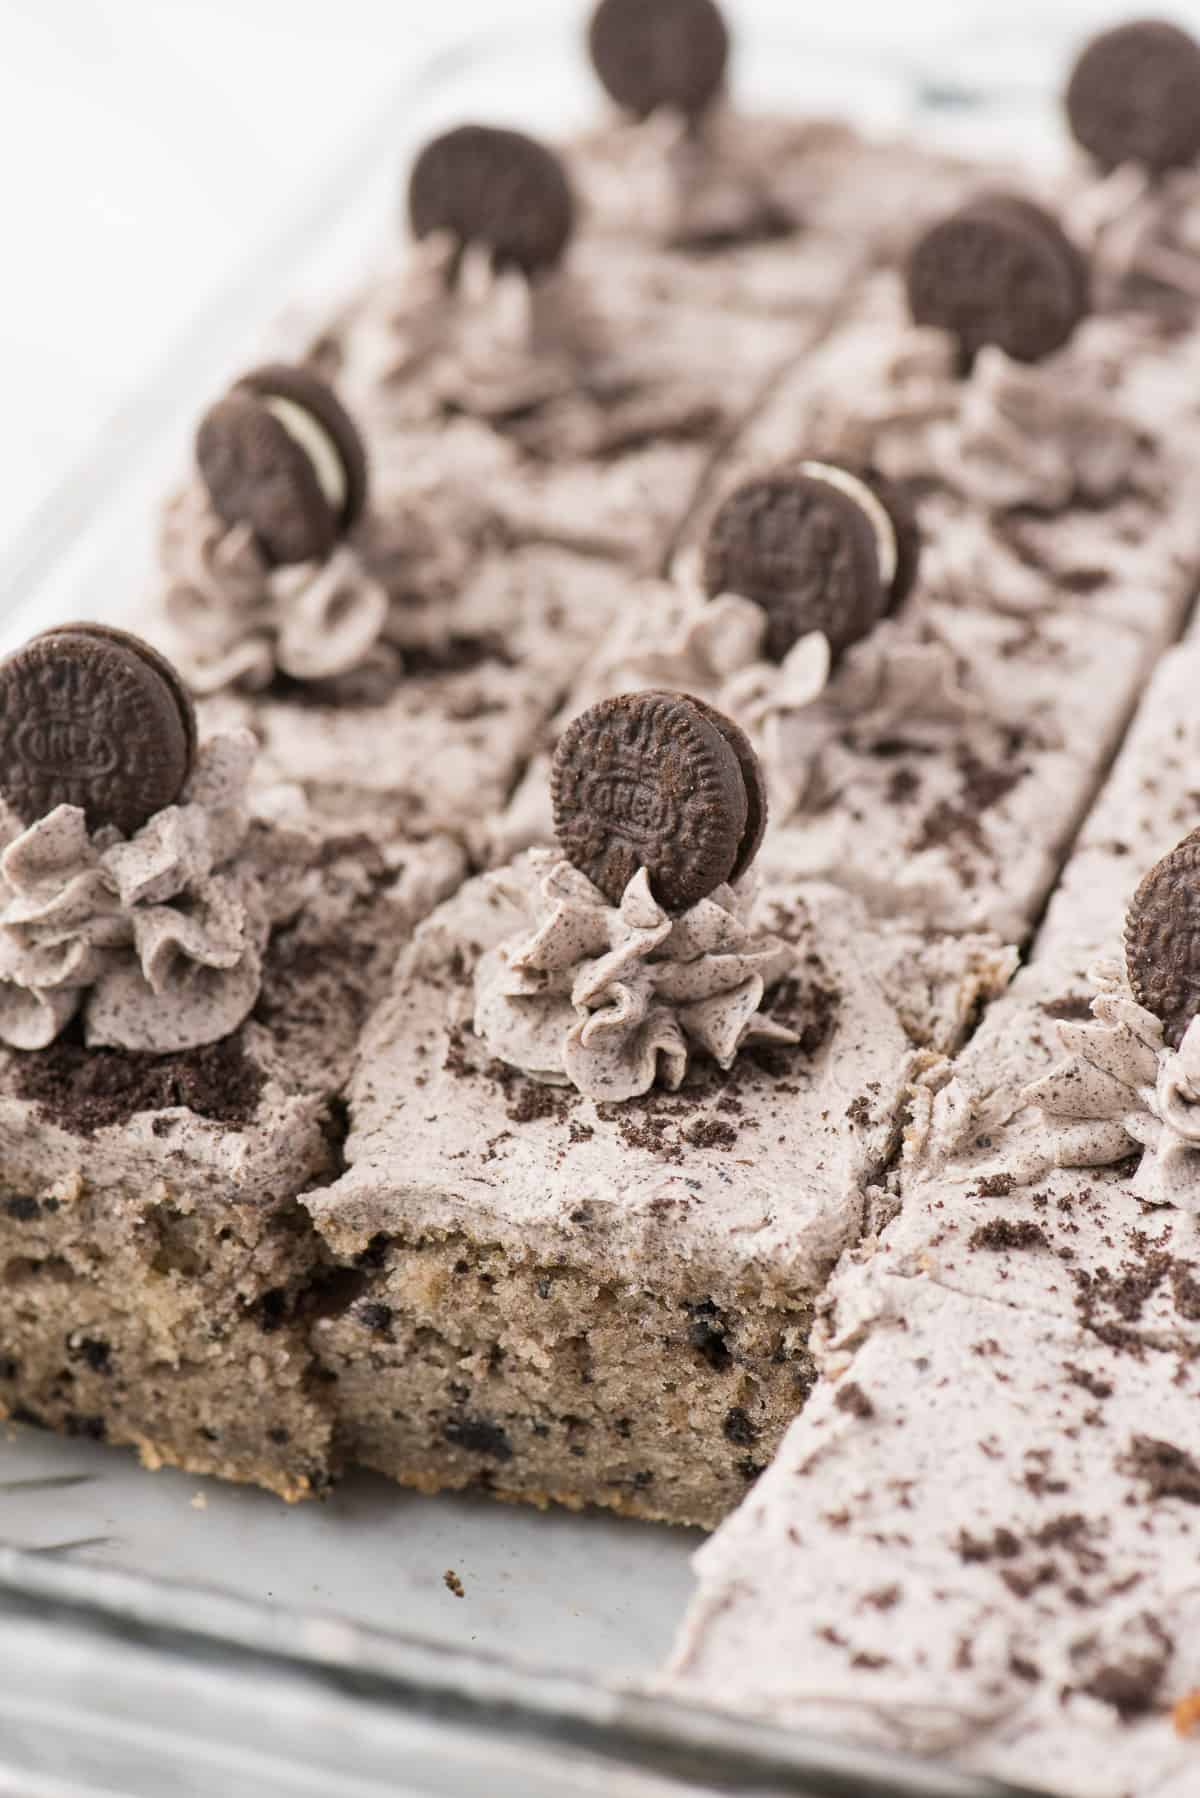 oreo cake cut into pieces in glass 9x13 inch pan